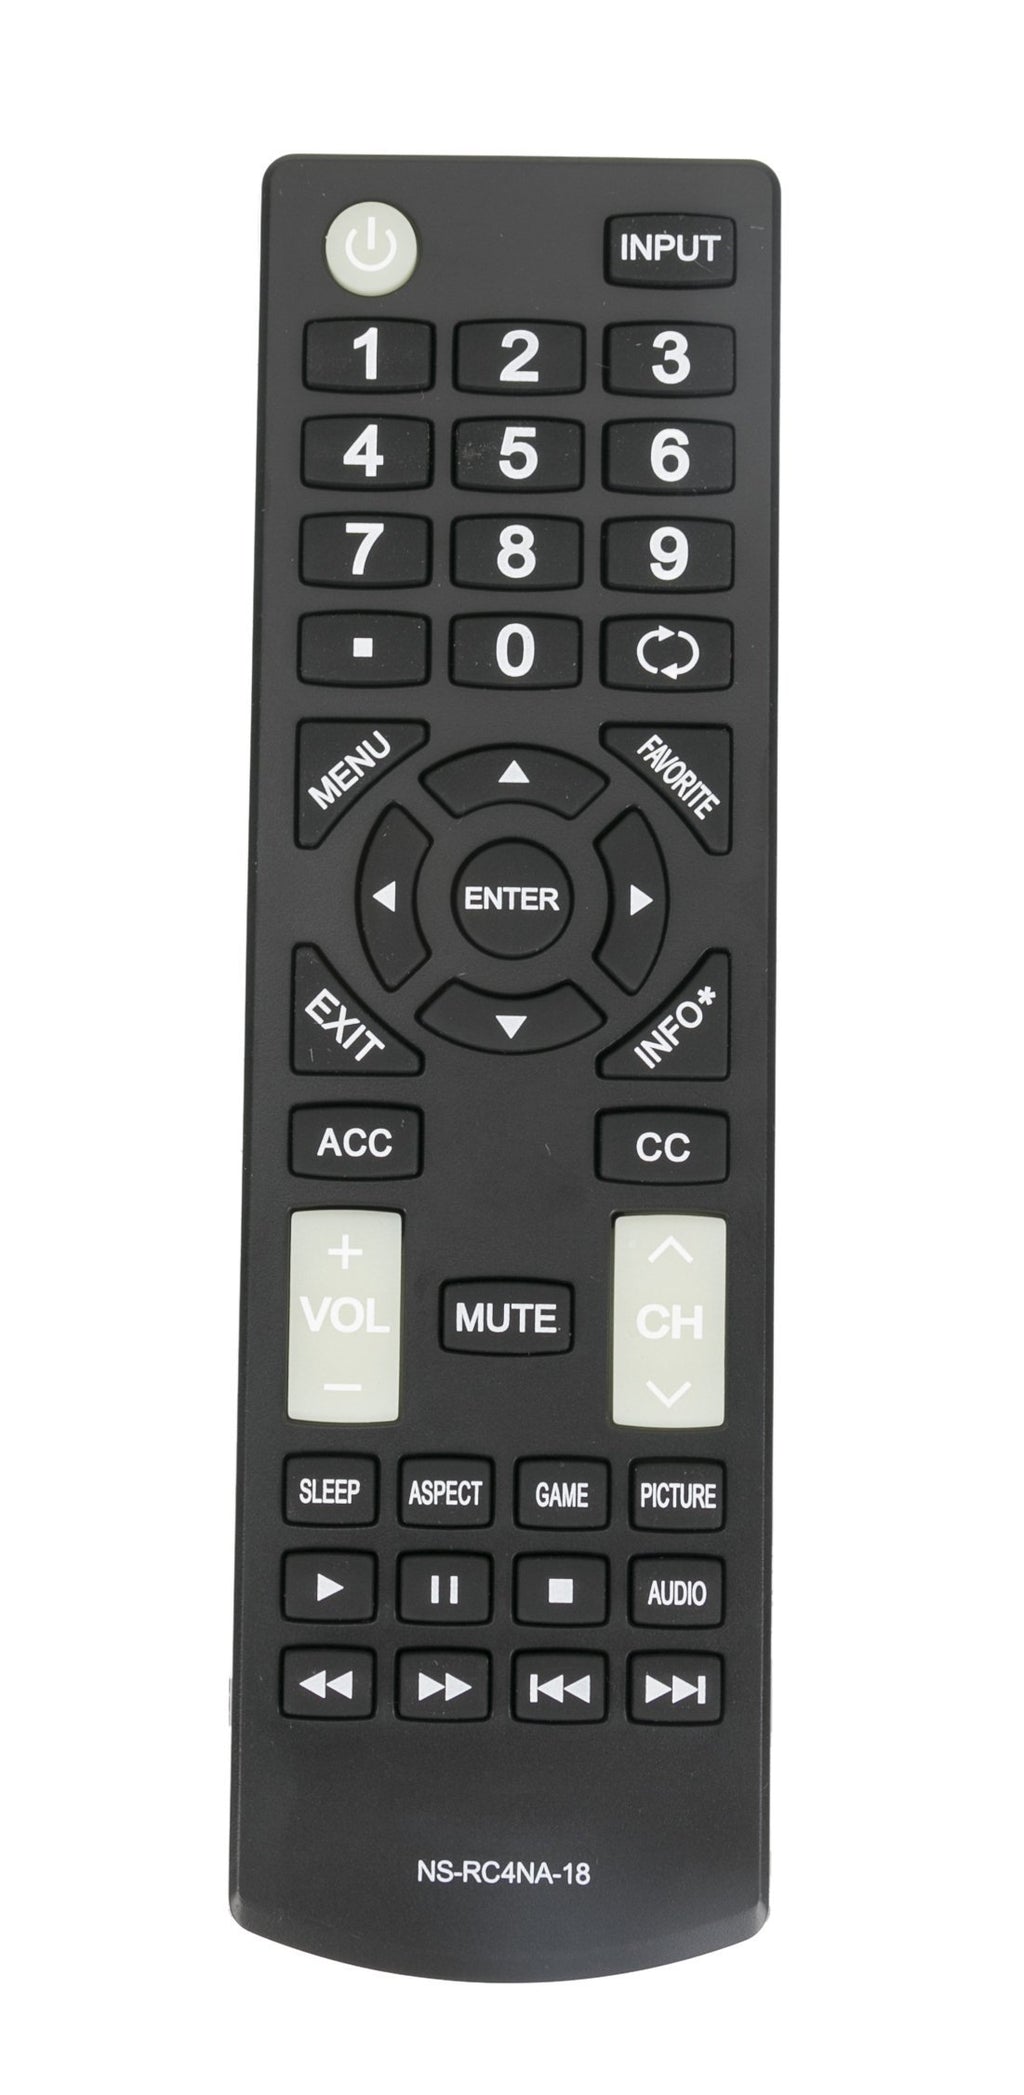 New Remote Control NS-RC4NA-18 for INSIGNI TV NS-24D310NA19 NS24D310NA19 NS32D220NA18 NS-32D220NA18 NS-NS-19D310NA19 NS19D310NA19 NS22D420NA18 NS-22D420NA18 32D220NA-18 NS32D311MX17 NS-32D311MX